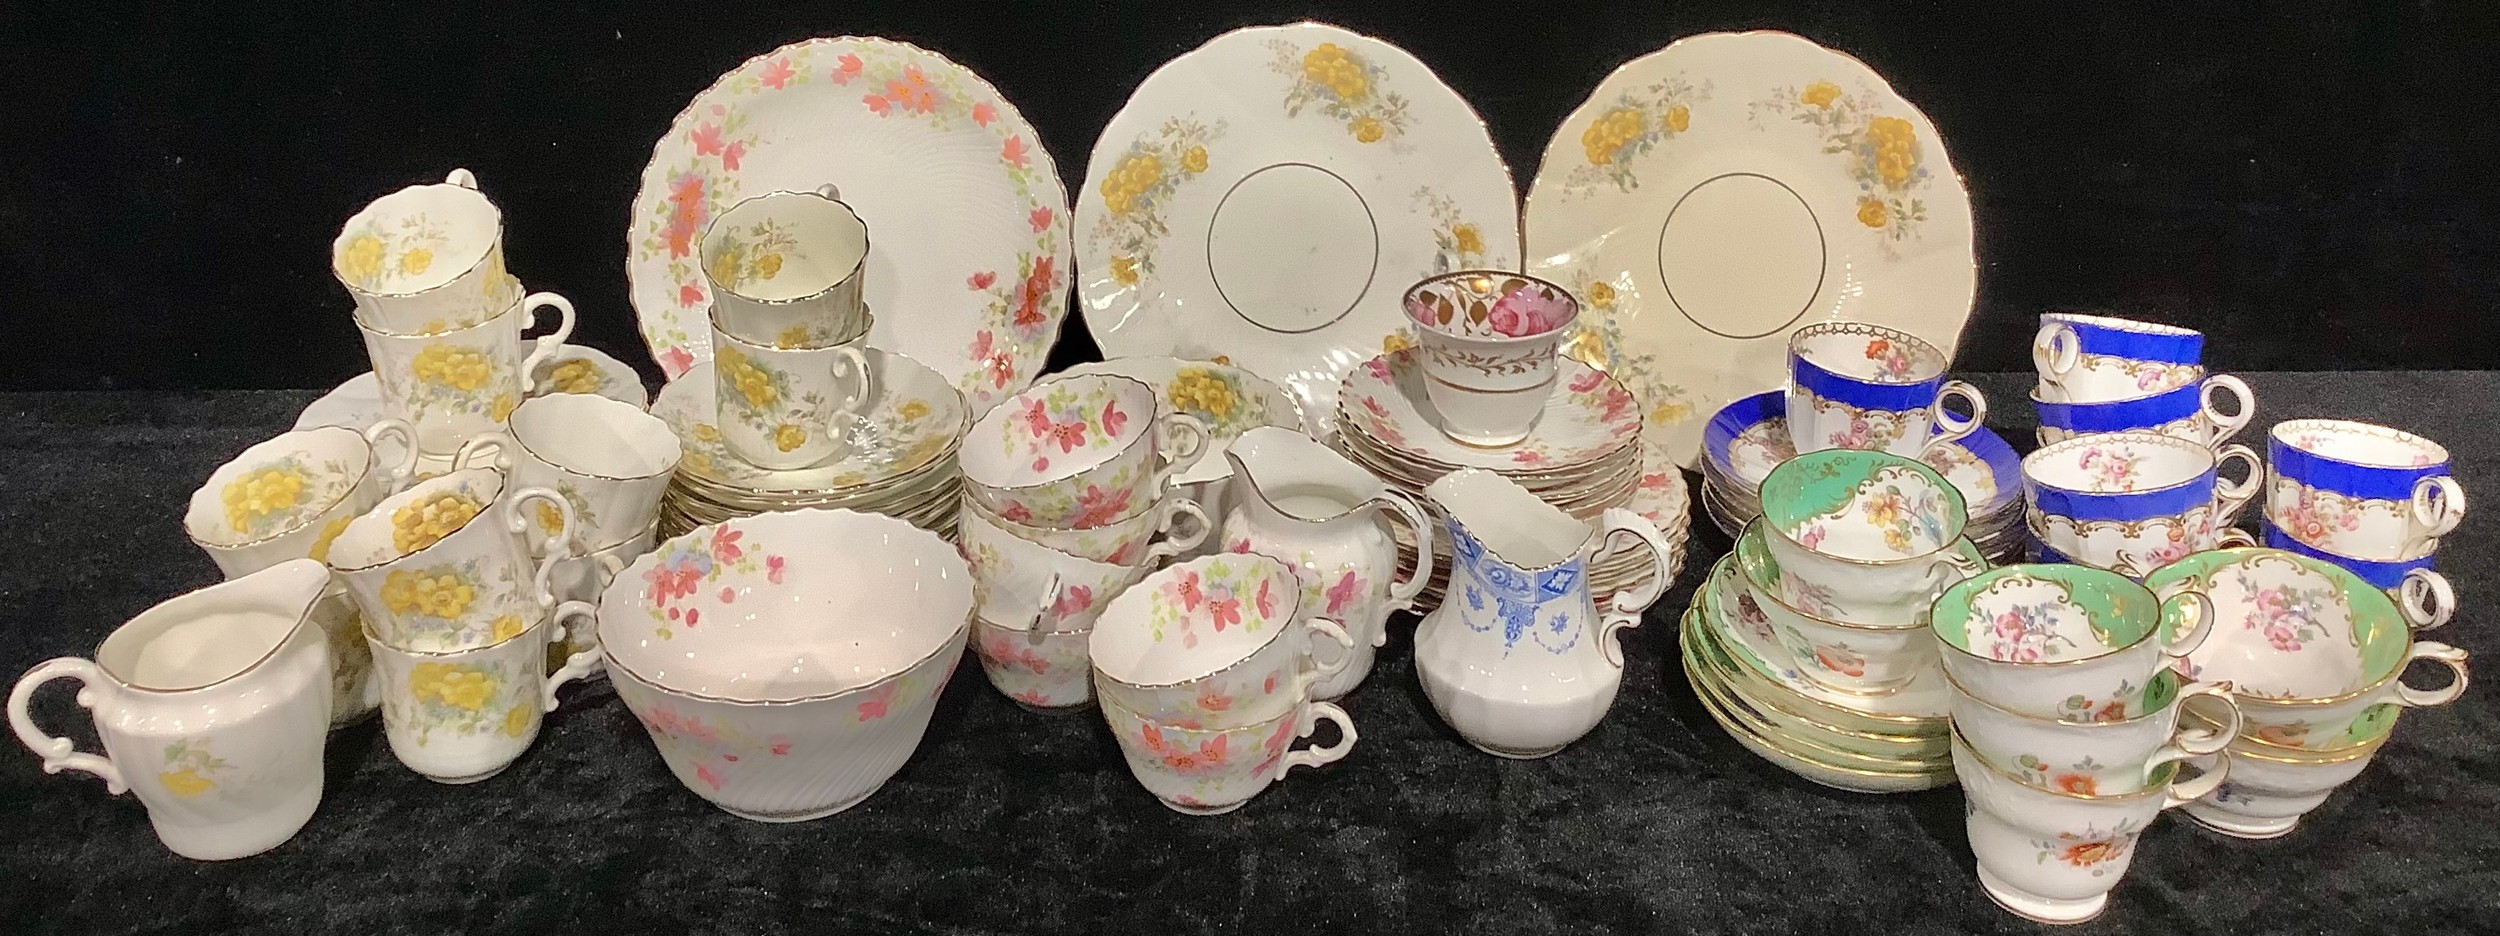 An Edwardian tea service for ten, decorated with yellow flowers, comprising cake plates, side